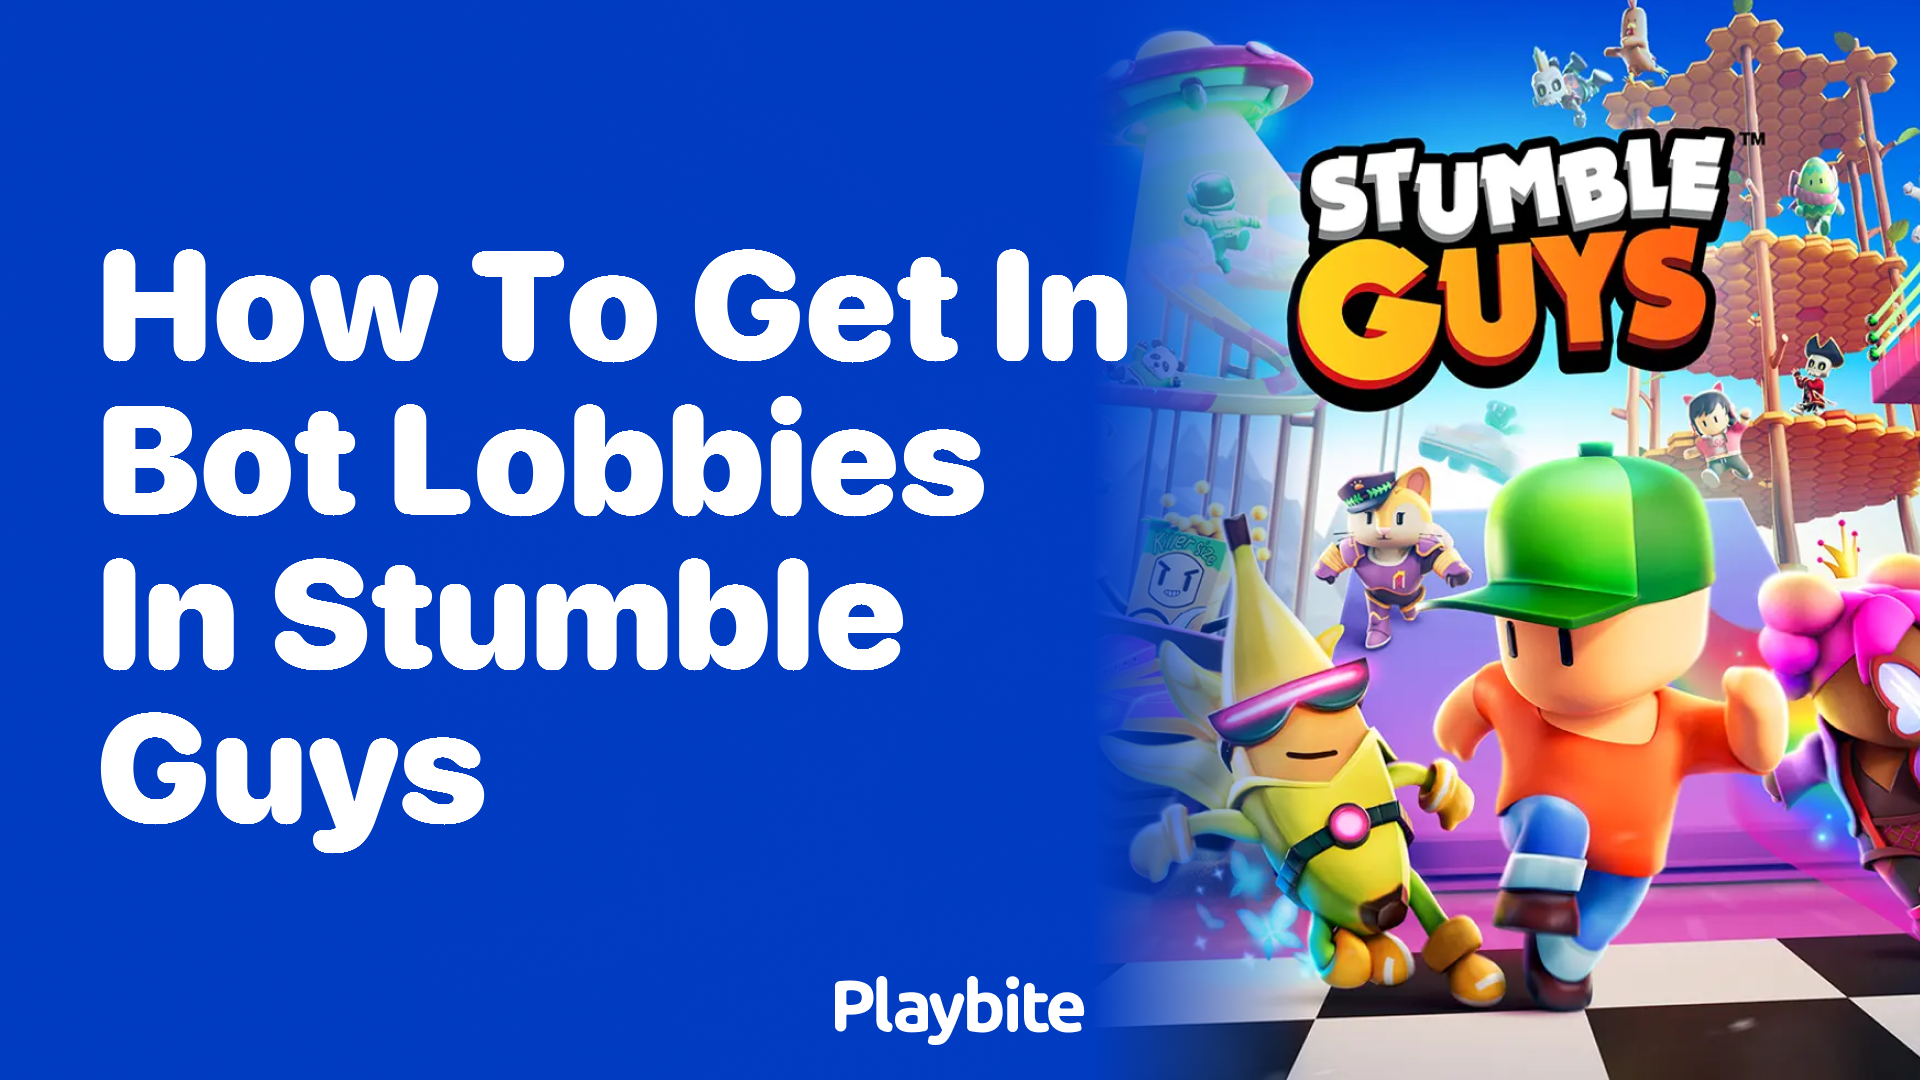 How to Get in Bot Lobbies in Stumble Guys